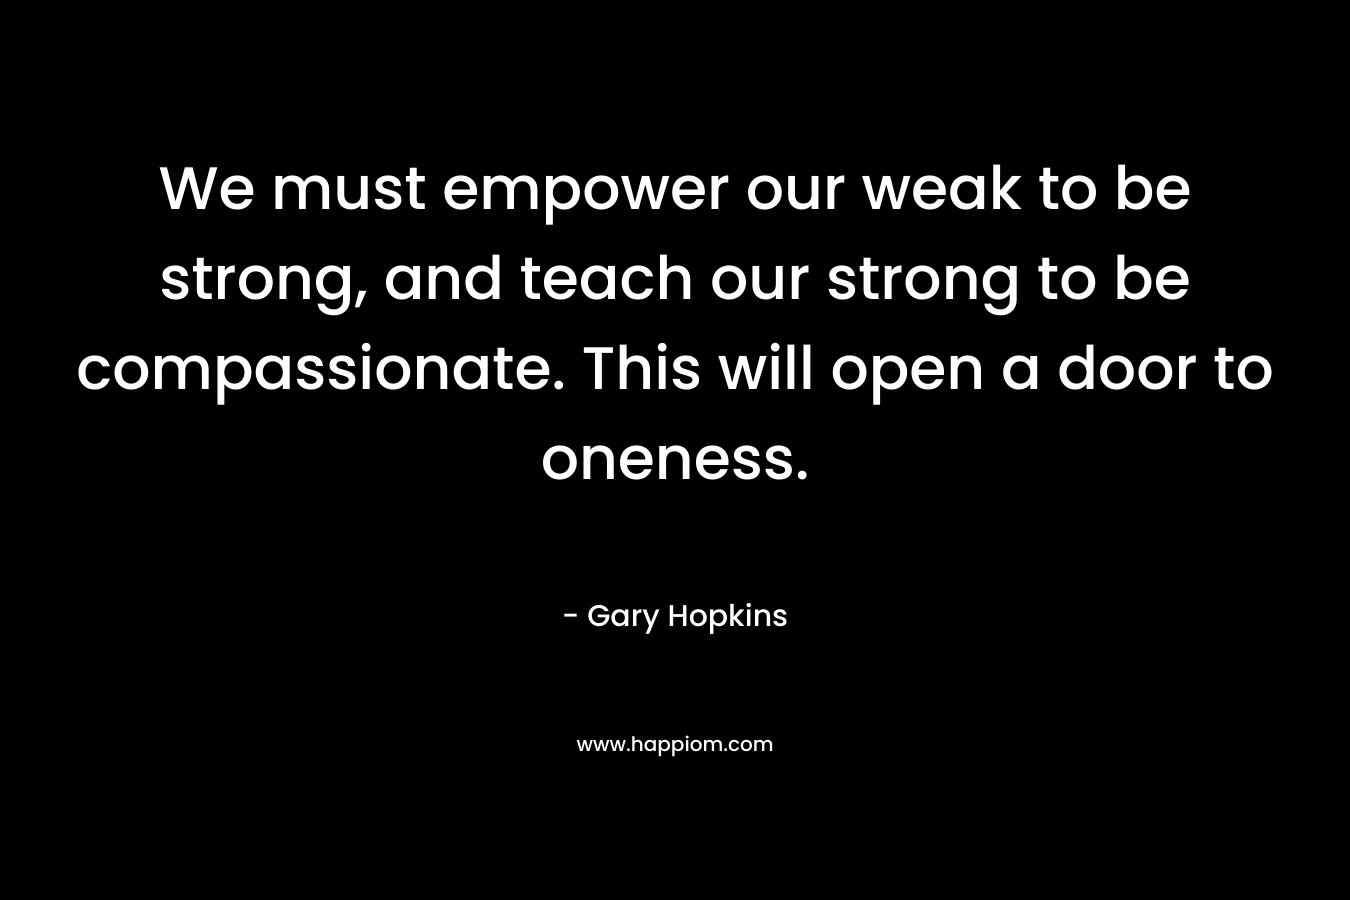 We must empower our weak to be strong, and teach our strong to be compassionate. This will open a door to oneness.